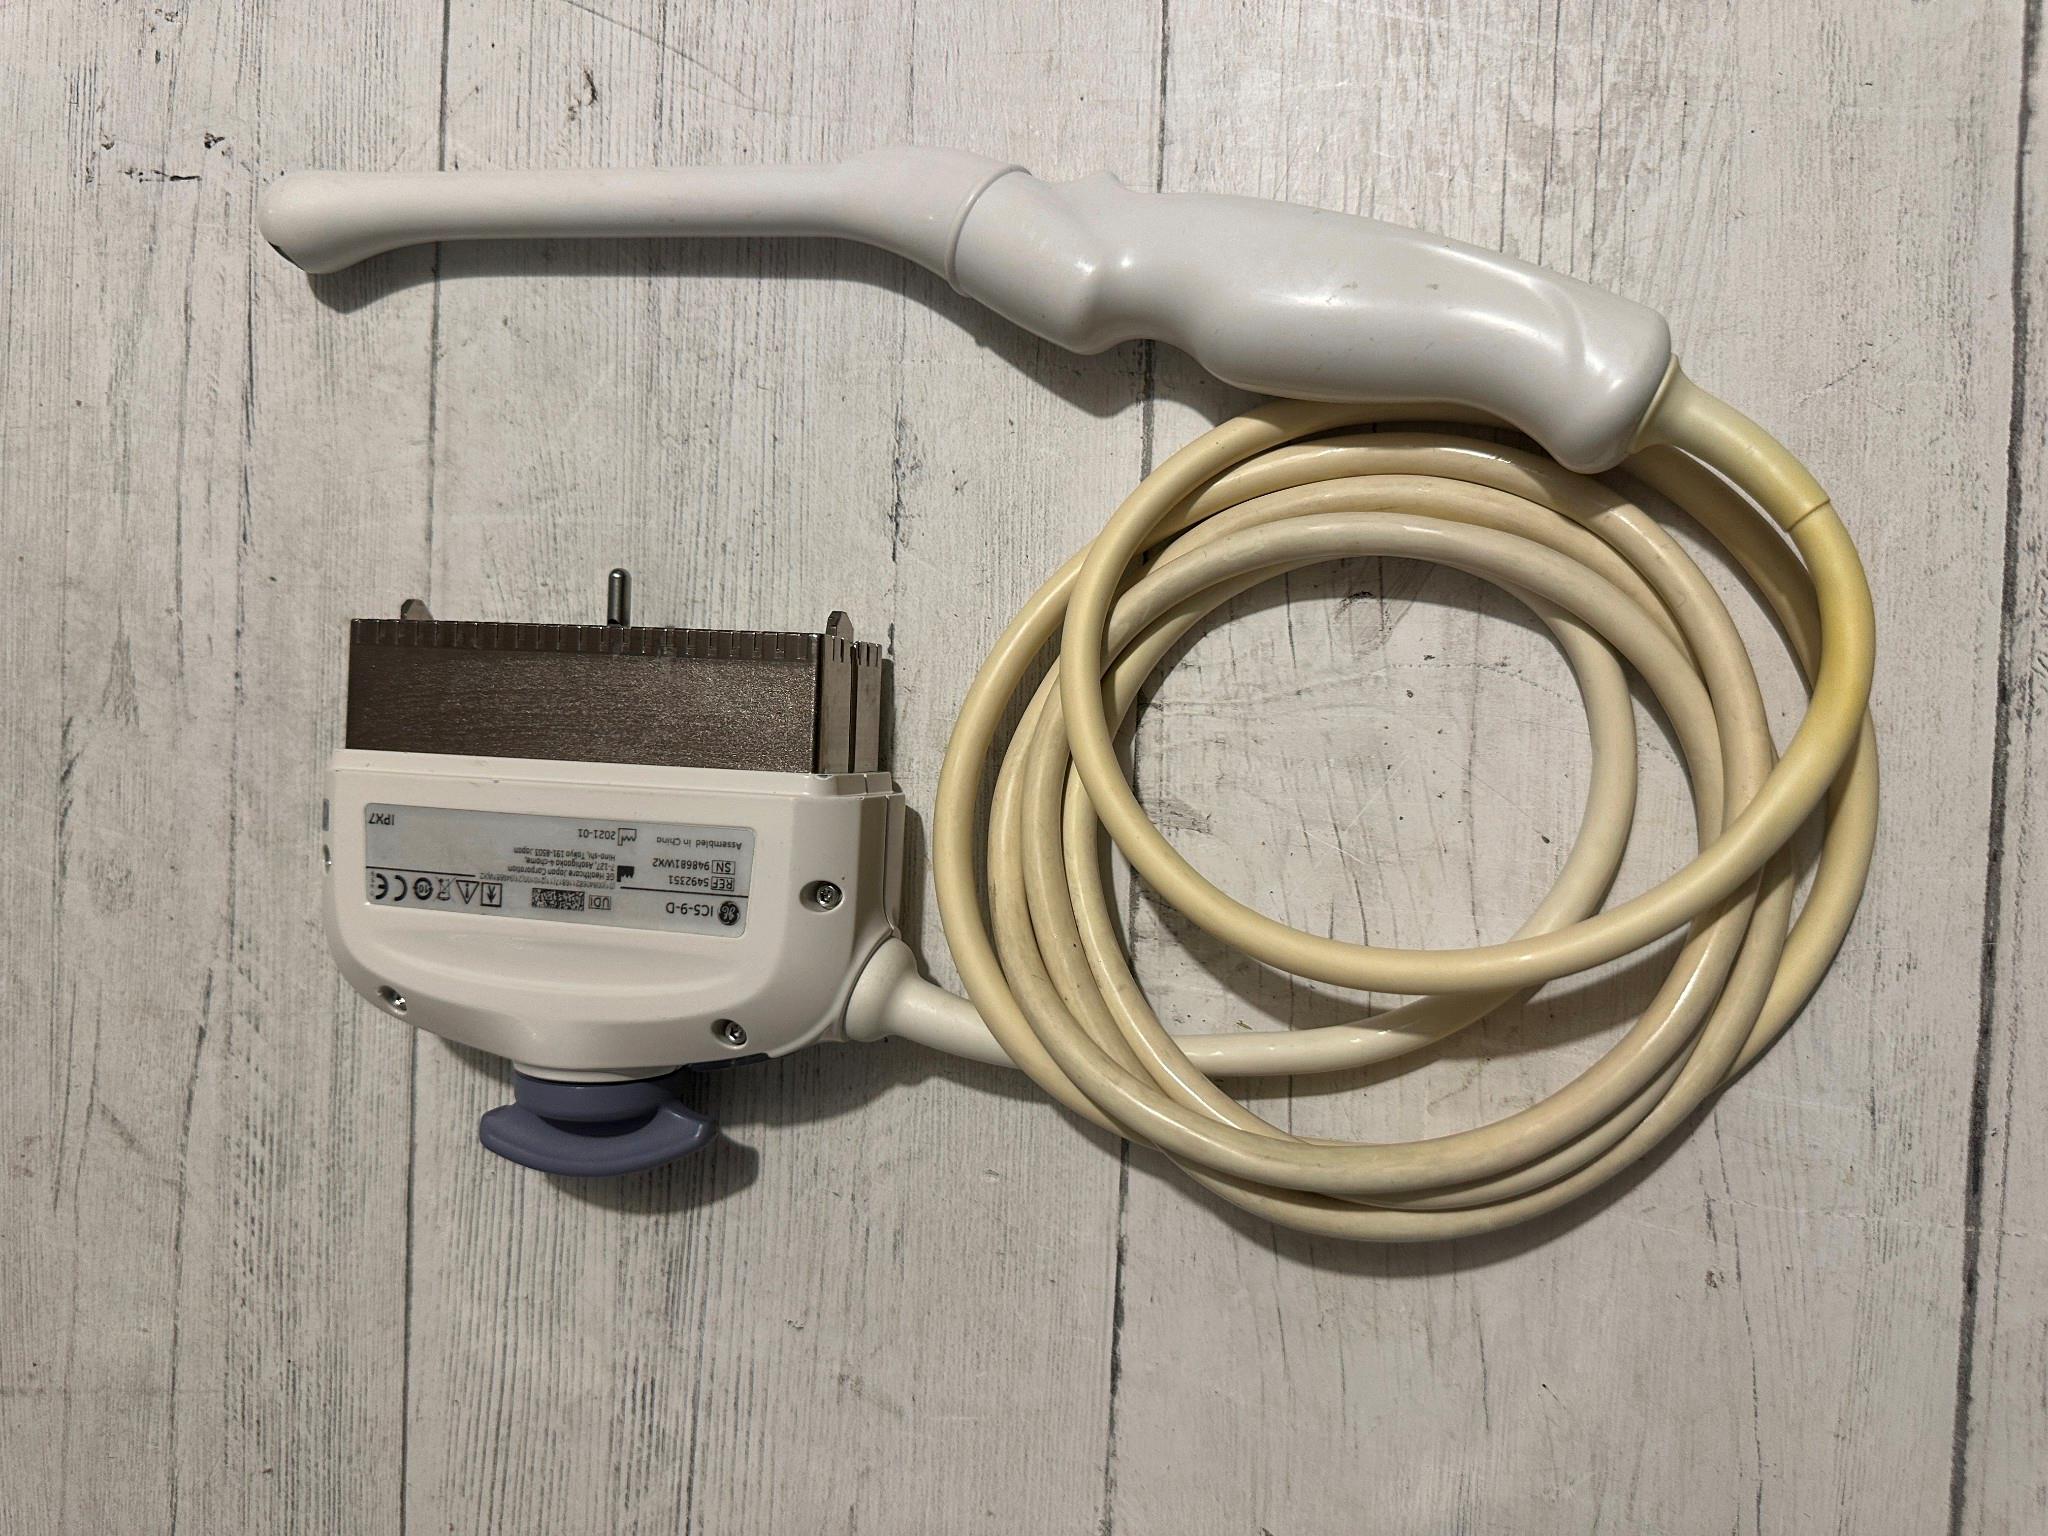 GE IC5-9-D WIDEBAND 4-9 MHZ MICROCONVEX ENDOCAVITY ULTRASOUND PROBE TRANSDUCER DIAGNOSTIC ULTRASOUND MACHINES FOR SALE